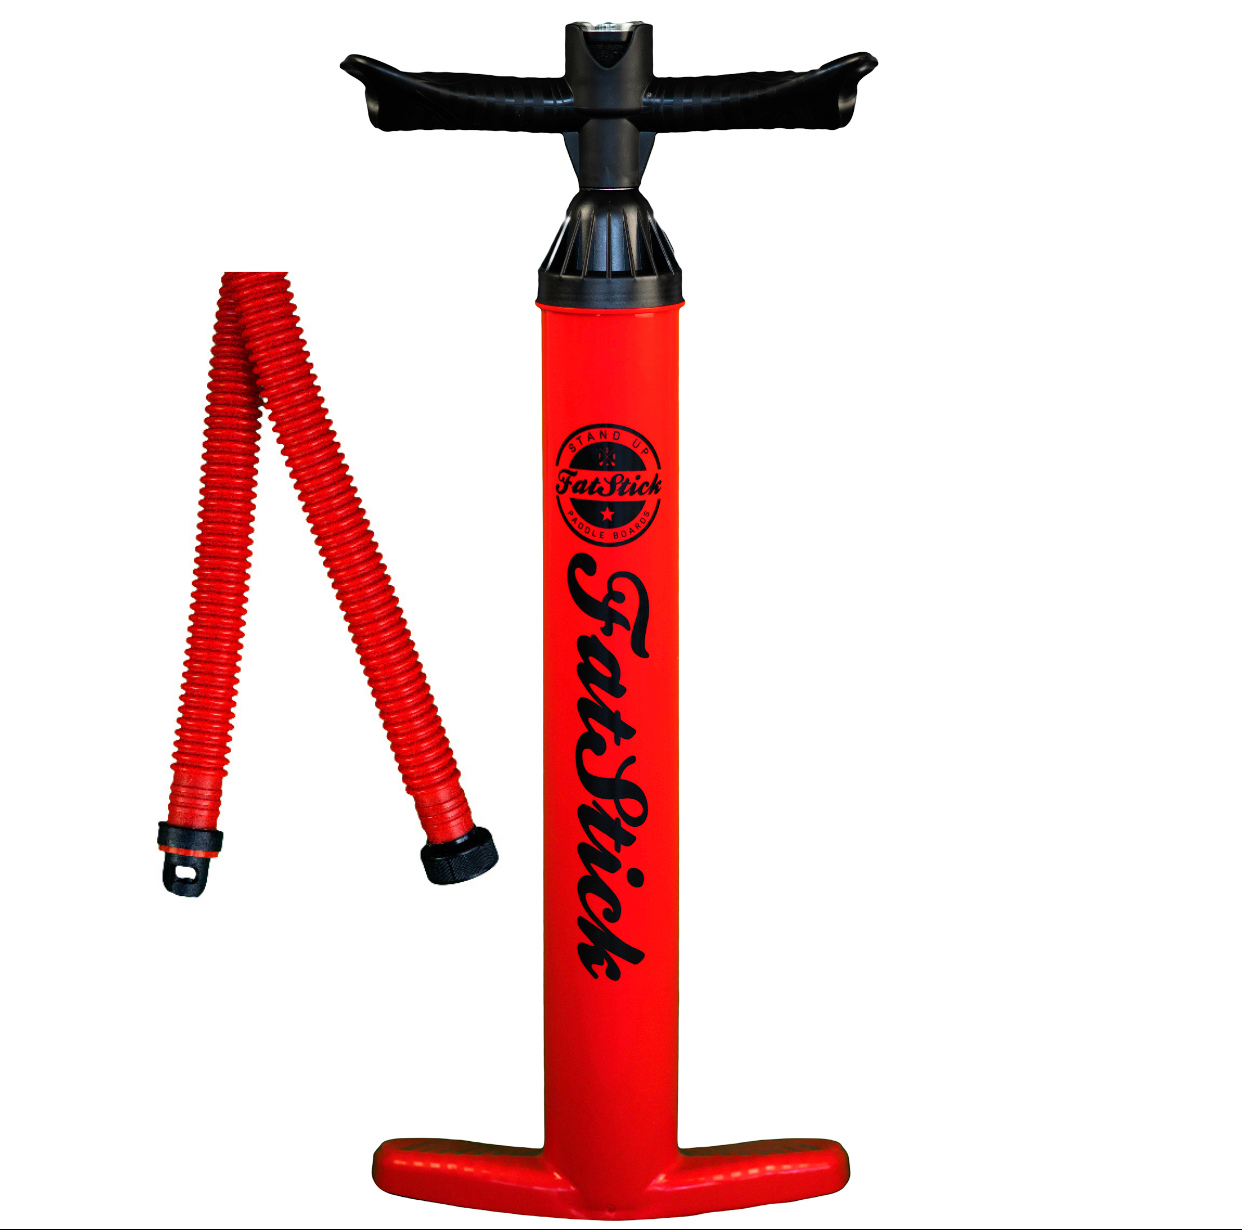 High Pressure SUP Hand Pump for Inflatable Paddle Board or Kayak-Accessories/Bags-fatstickboards